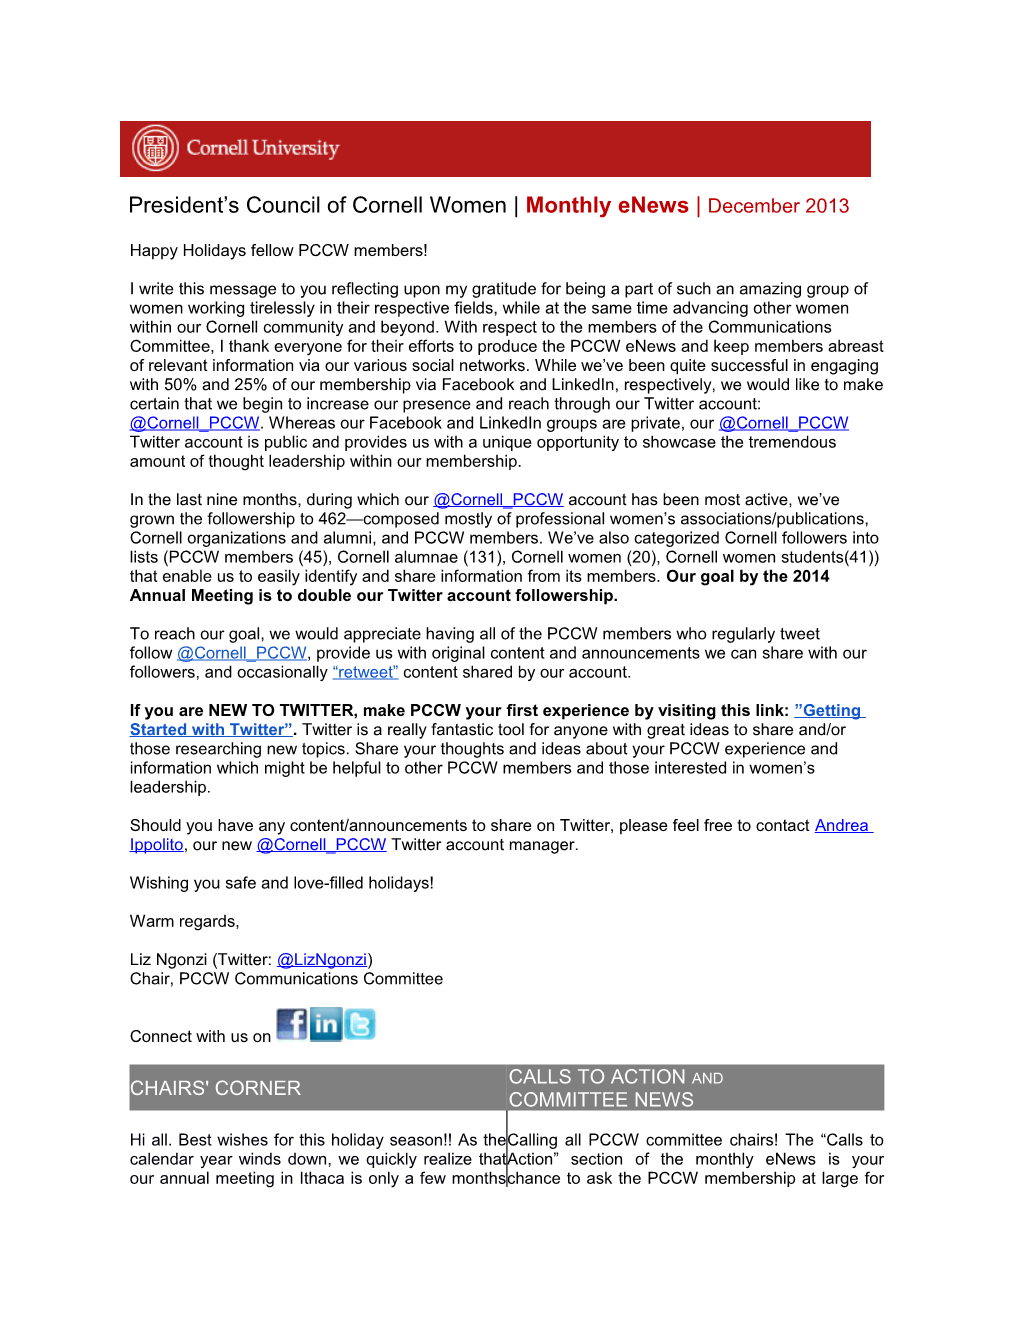 President S Council of Cornell Women Monthly Enews December 2013